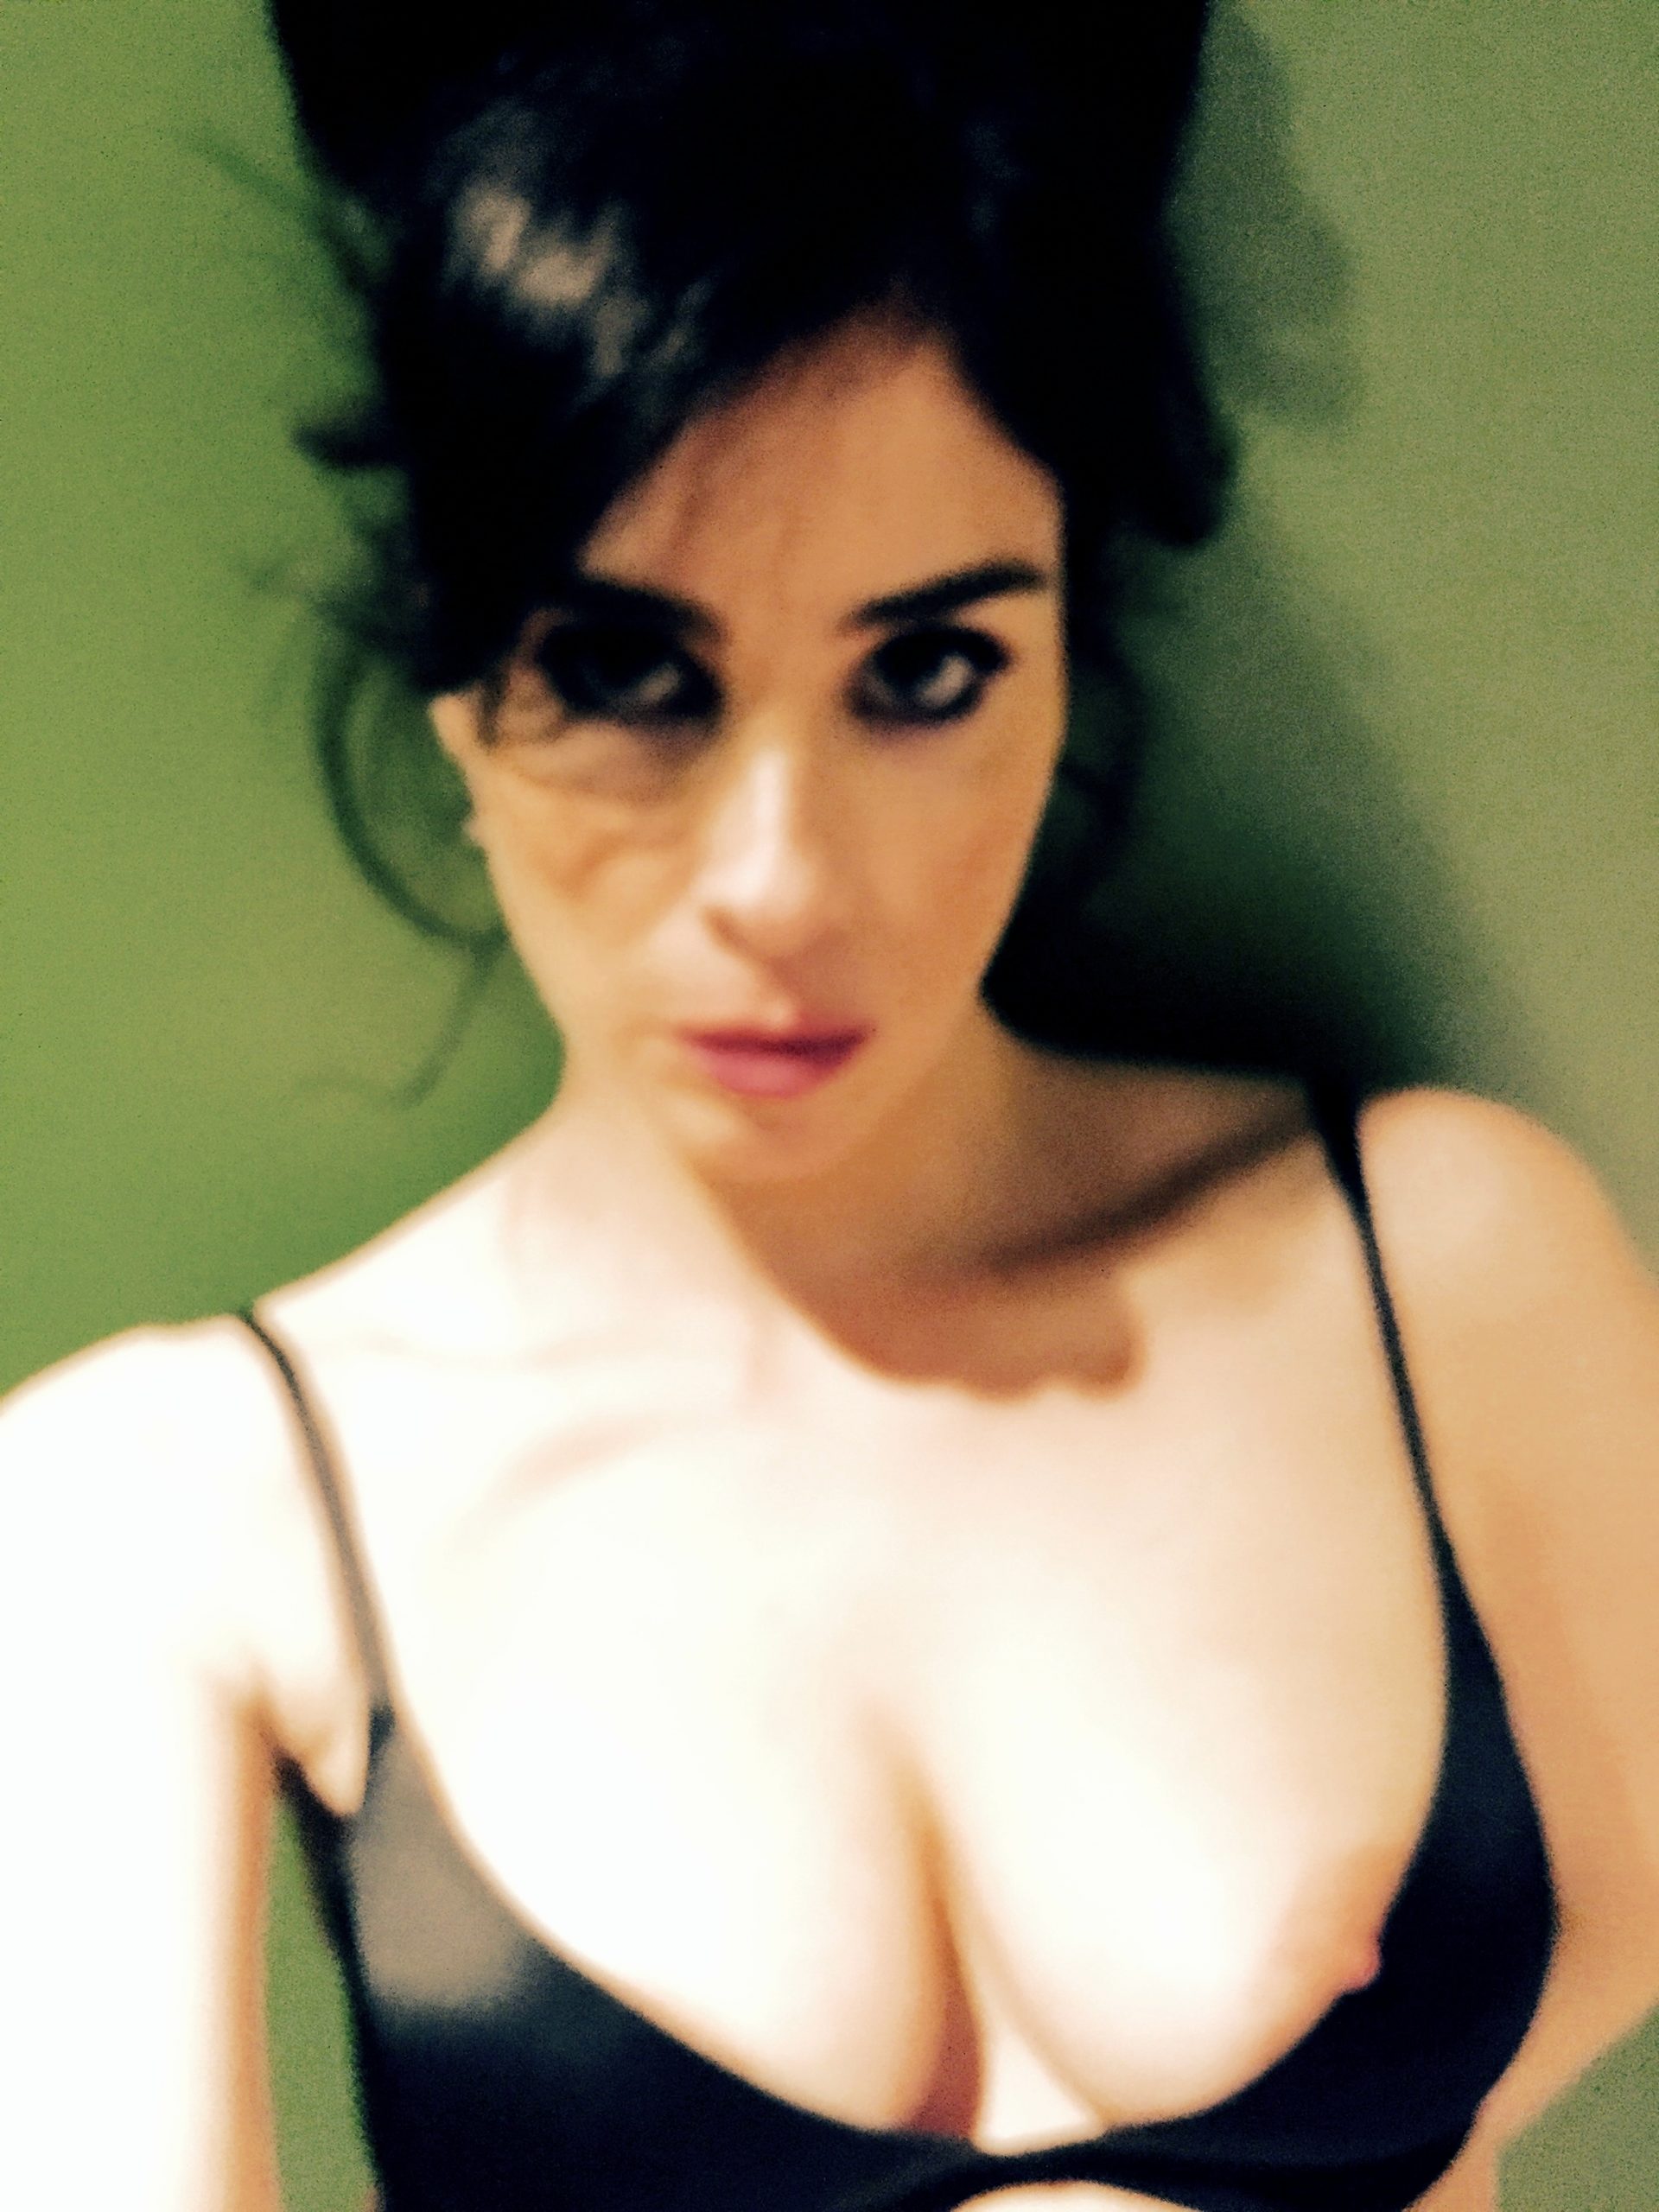 Funny Brunette Sarah Silverman Happily Exposing Her Big Boobs in a Sexy Gallery